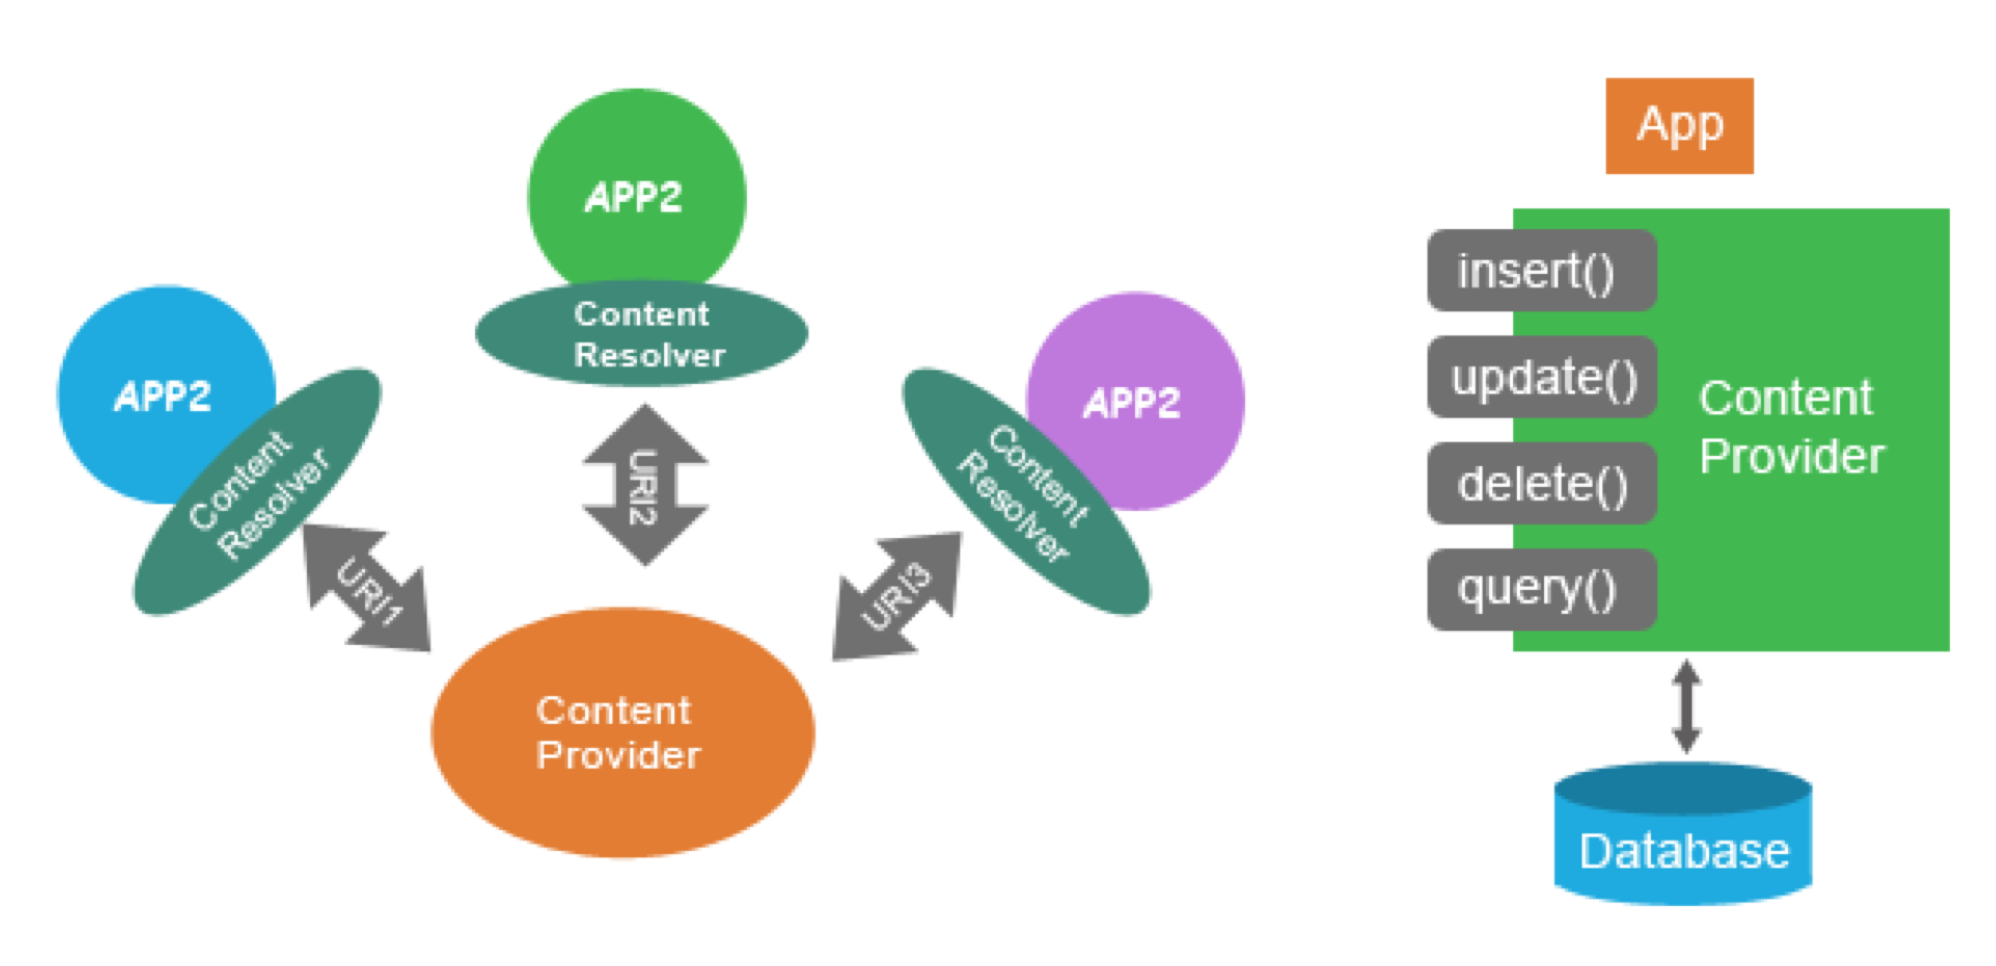 Insert or update. Content provider. Content provider Android. App-2-app. Android Studio content provider.